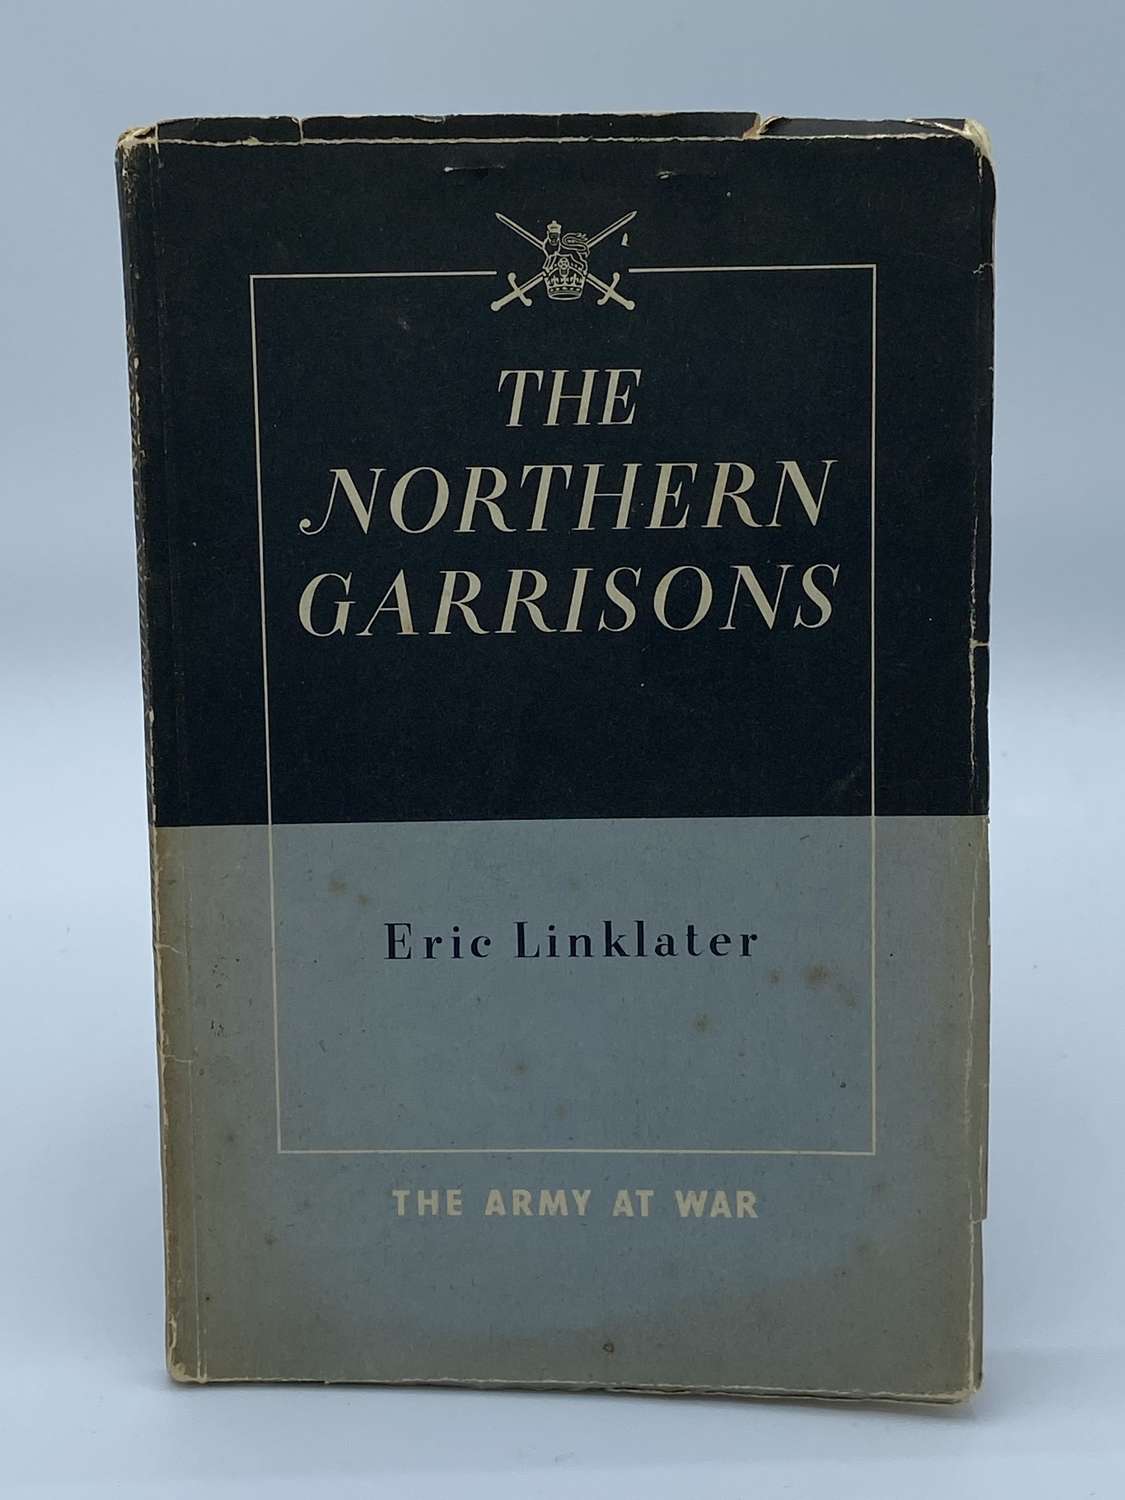 Literature 1941 The Northern Garrisons Wartime Account In Iceland